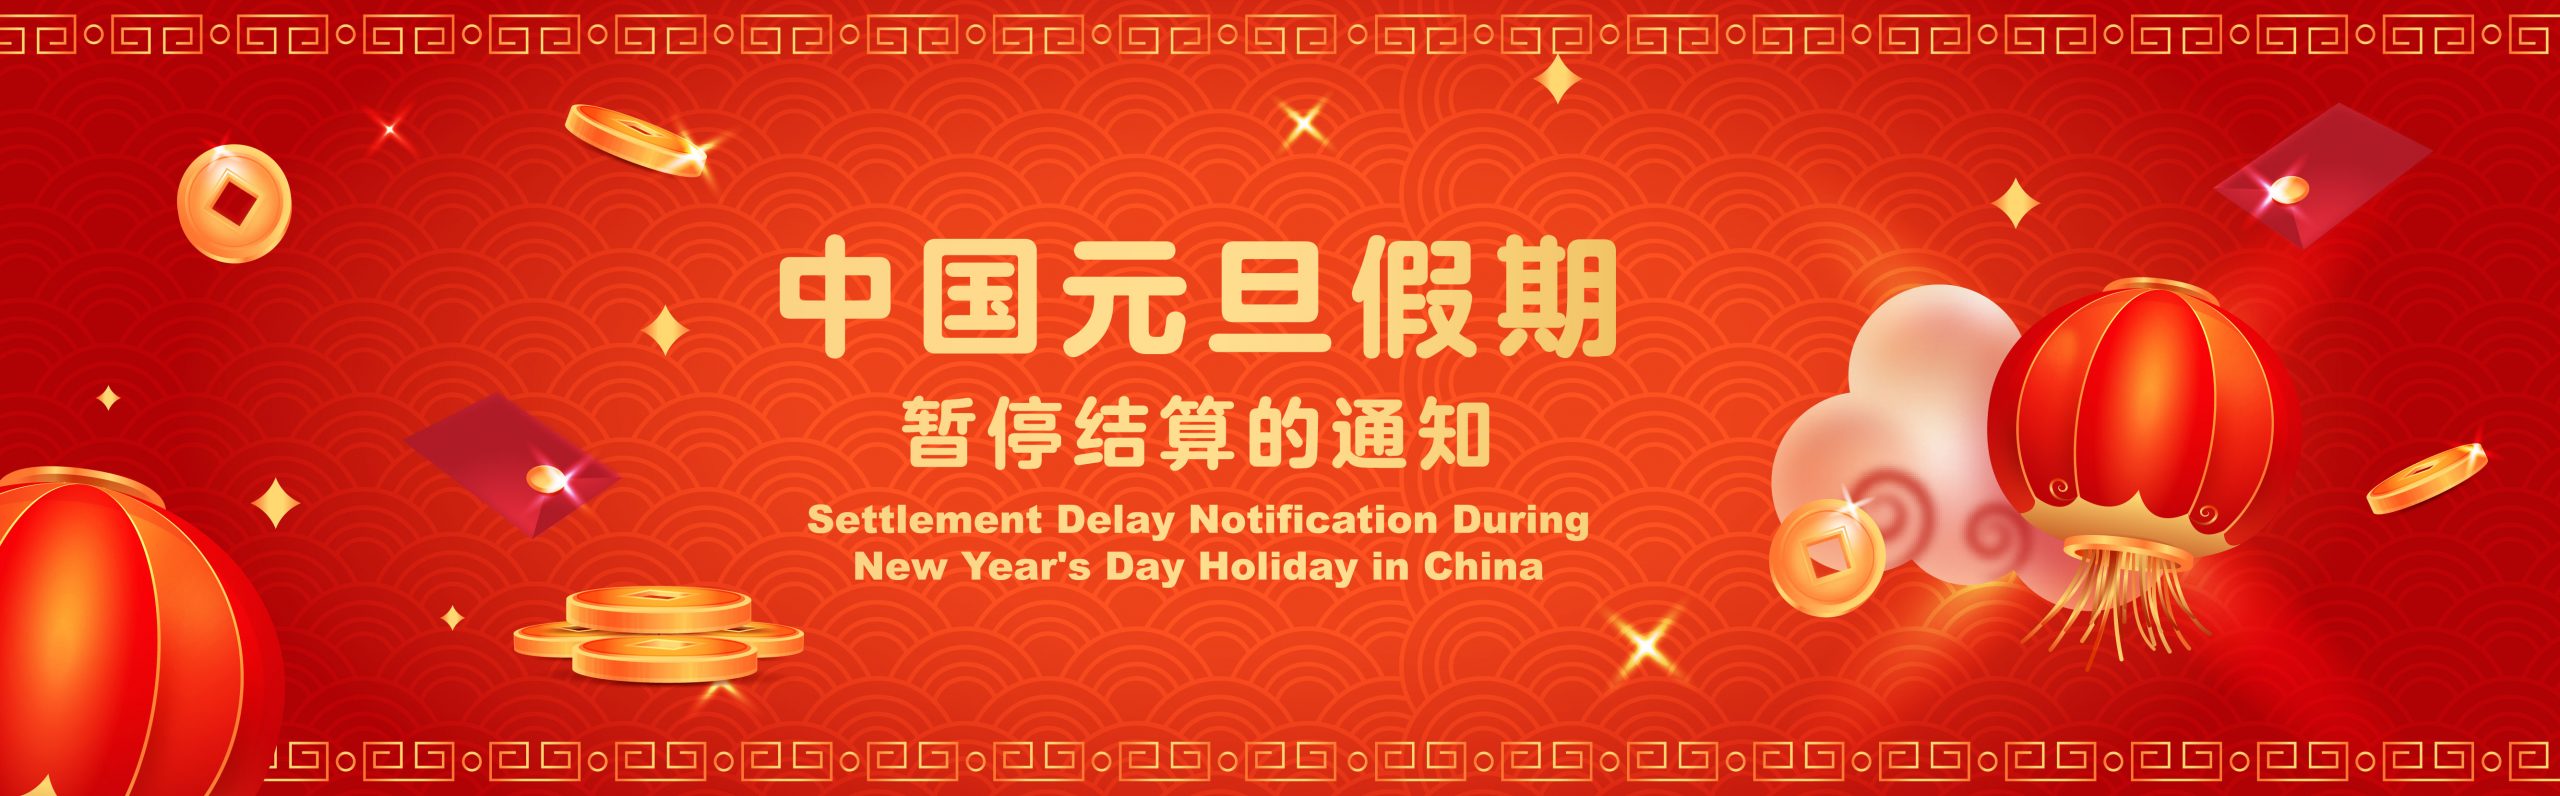 Settlement Delay Notification During New Year’s Day Holiday in China 关于2021年中国元旦假期暂停结算的通知